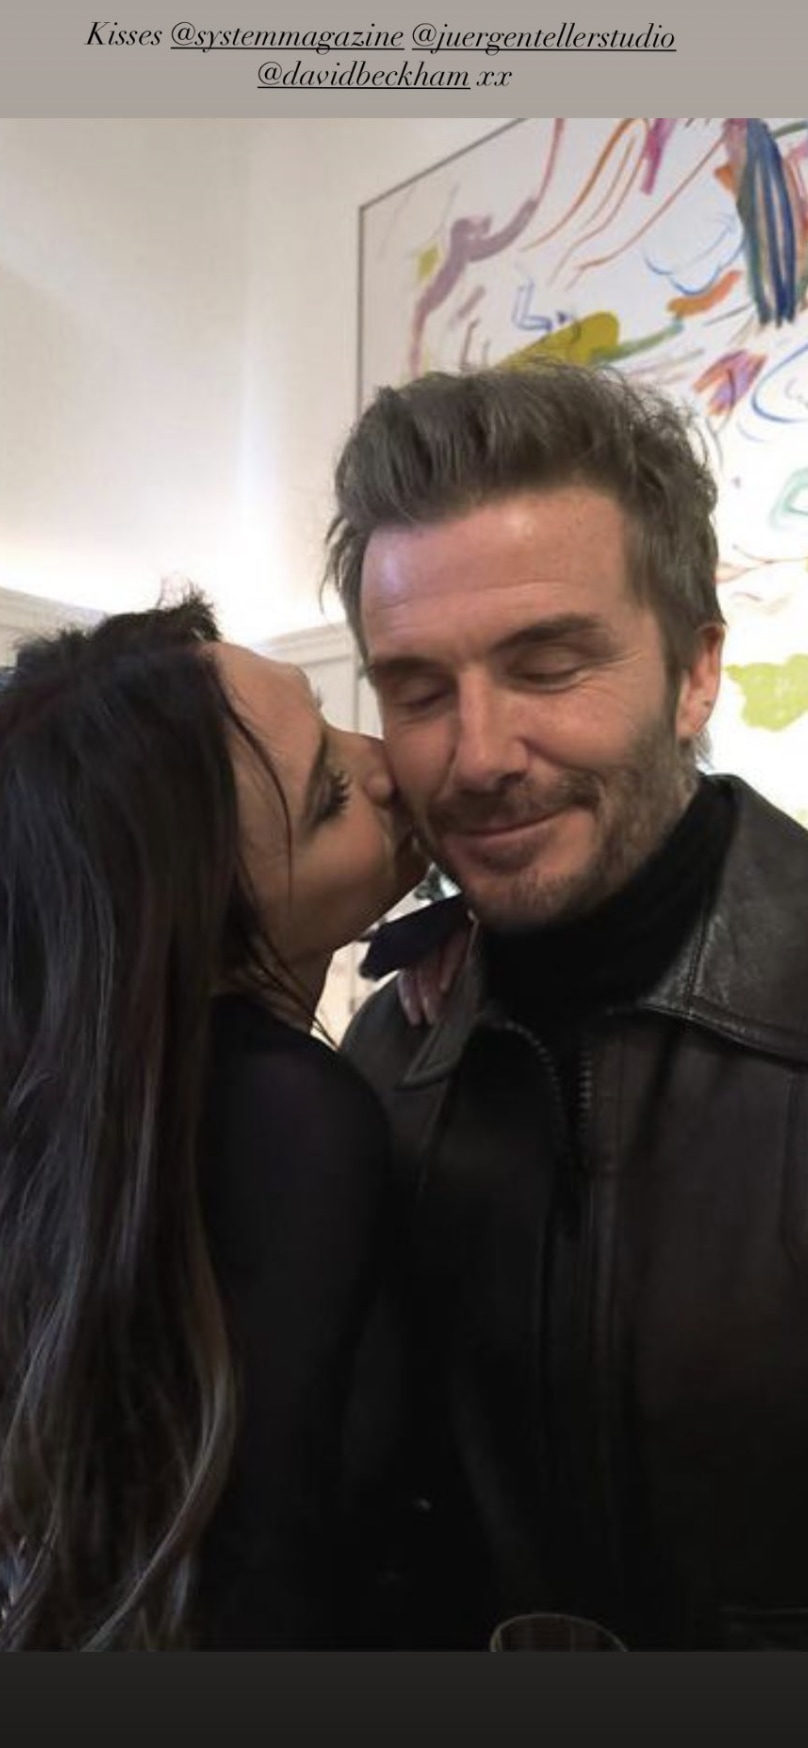 Victoria and David Beckham Only Have Eyes for Each Other in Sweet